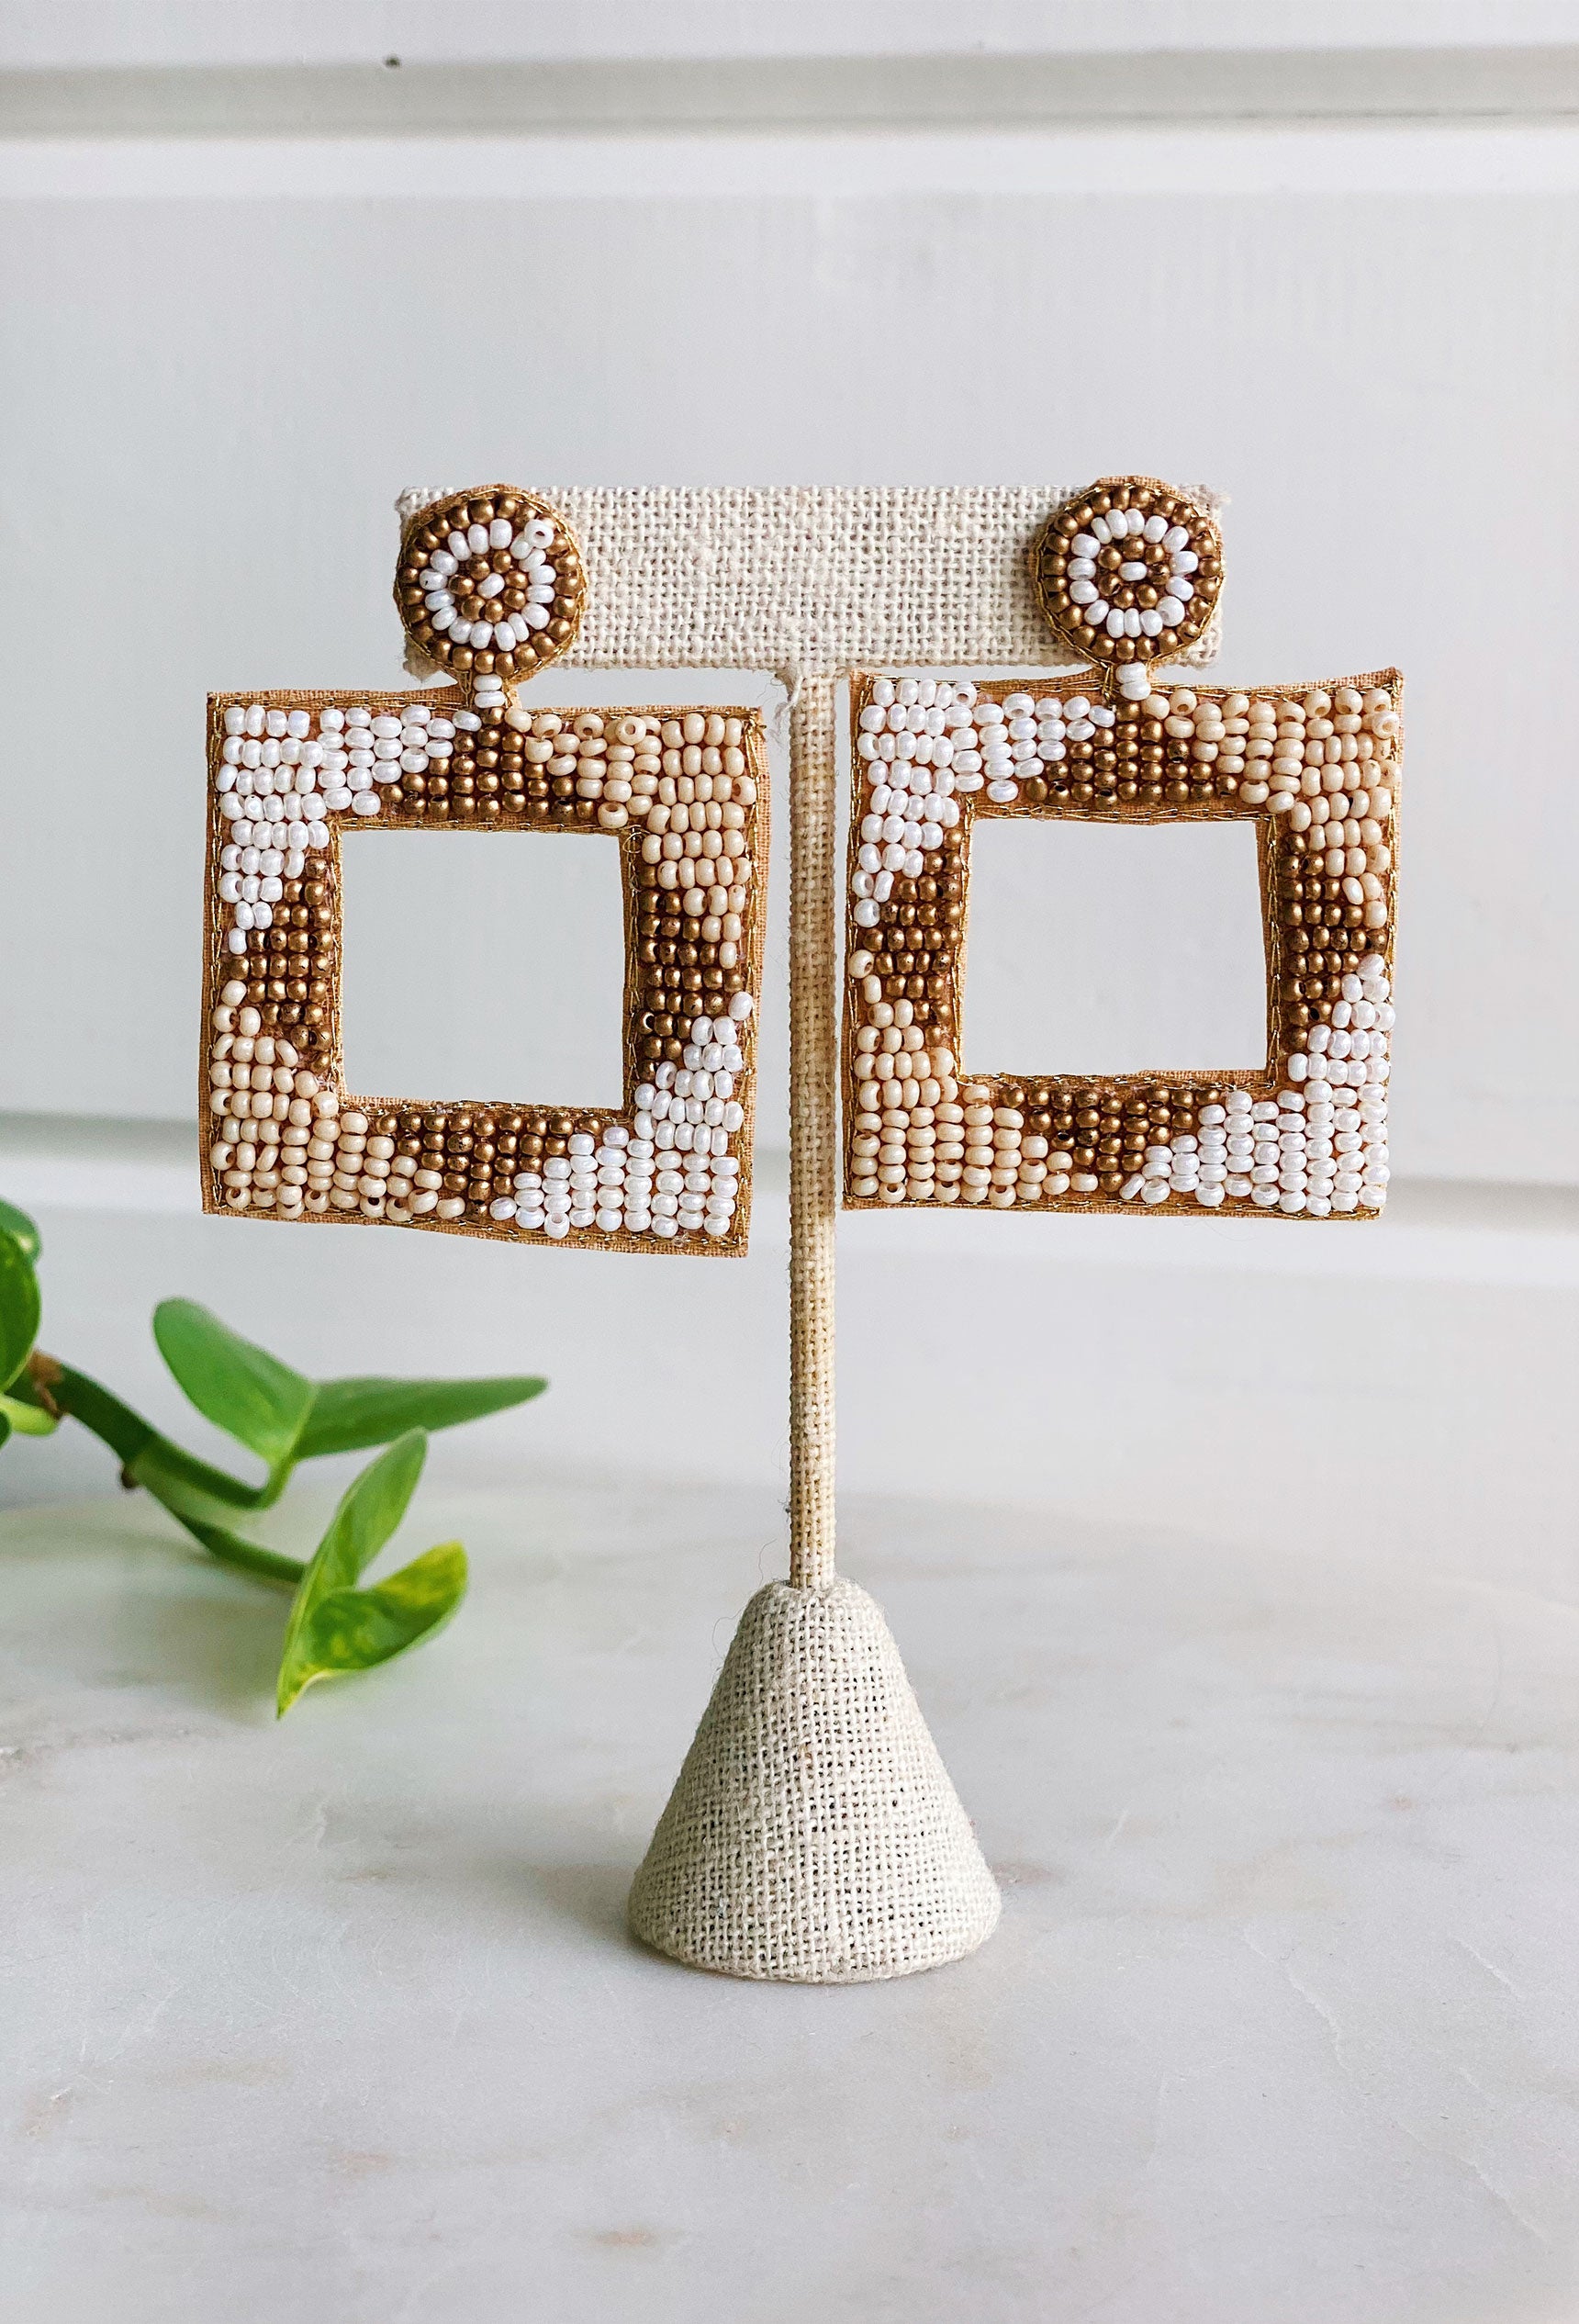 On My Mind Beaded Earrings, square shaped earrings with square hole in the middle, neutral colored beads, felt and post backing